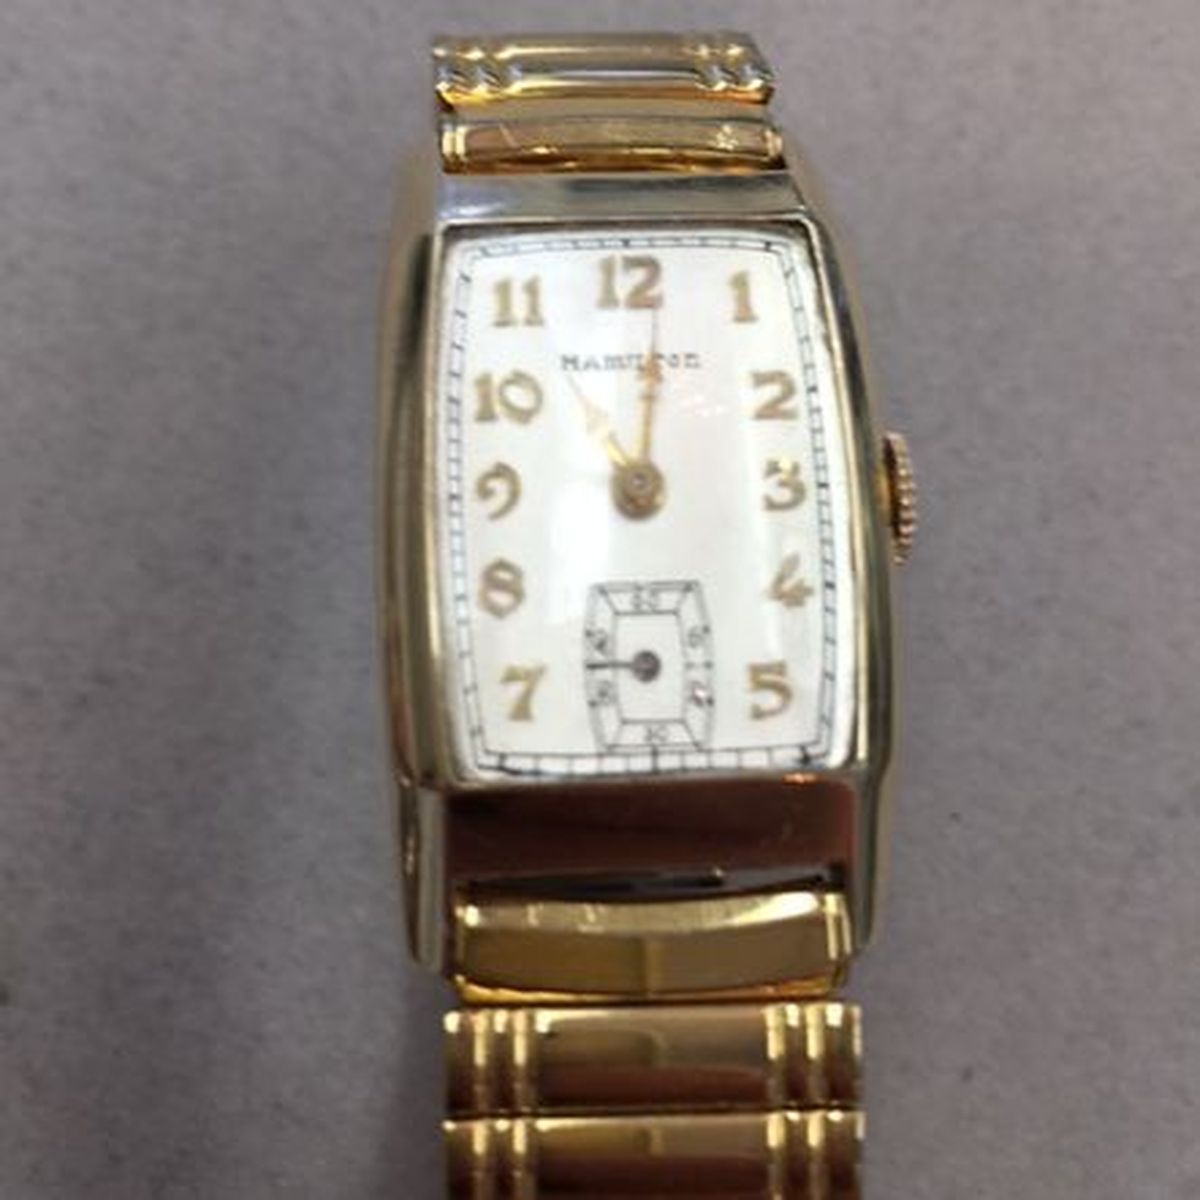 At Village Watch Center We Sell New & Used Hamiltion Watches-Beware of Fakes!